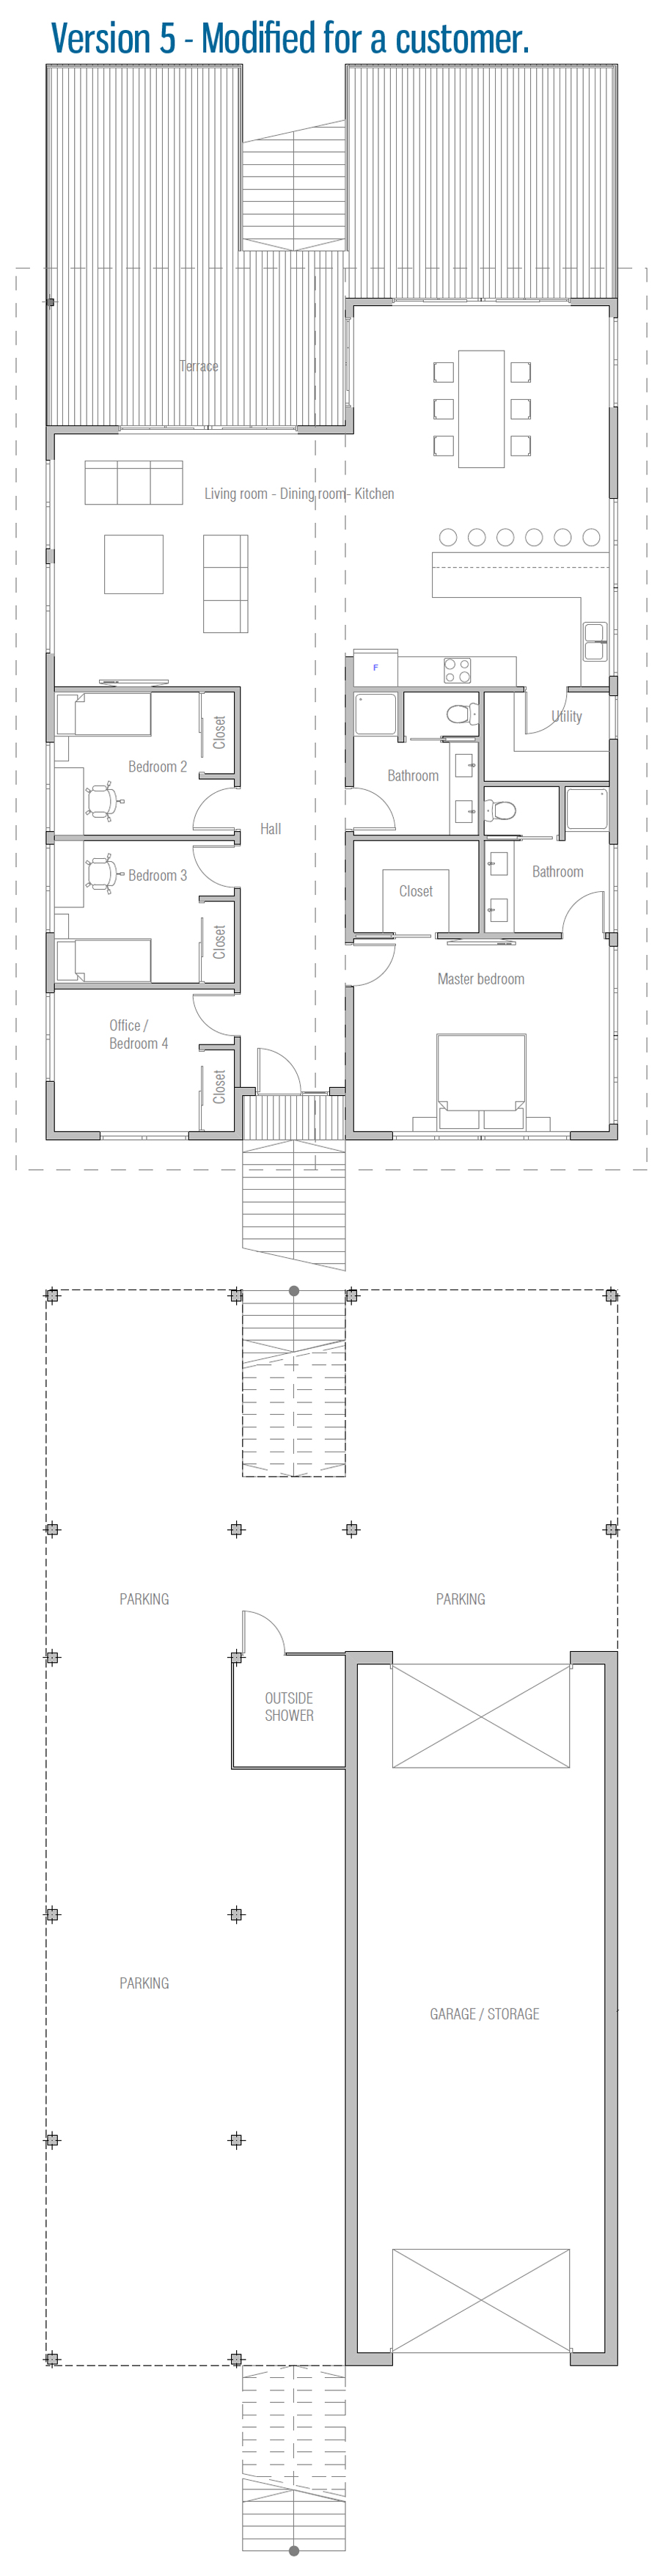 best-selling-house-plans_40_HOUSE_PLAN_CH539_V5png.jpg